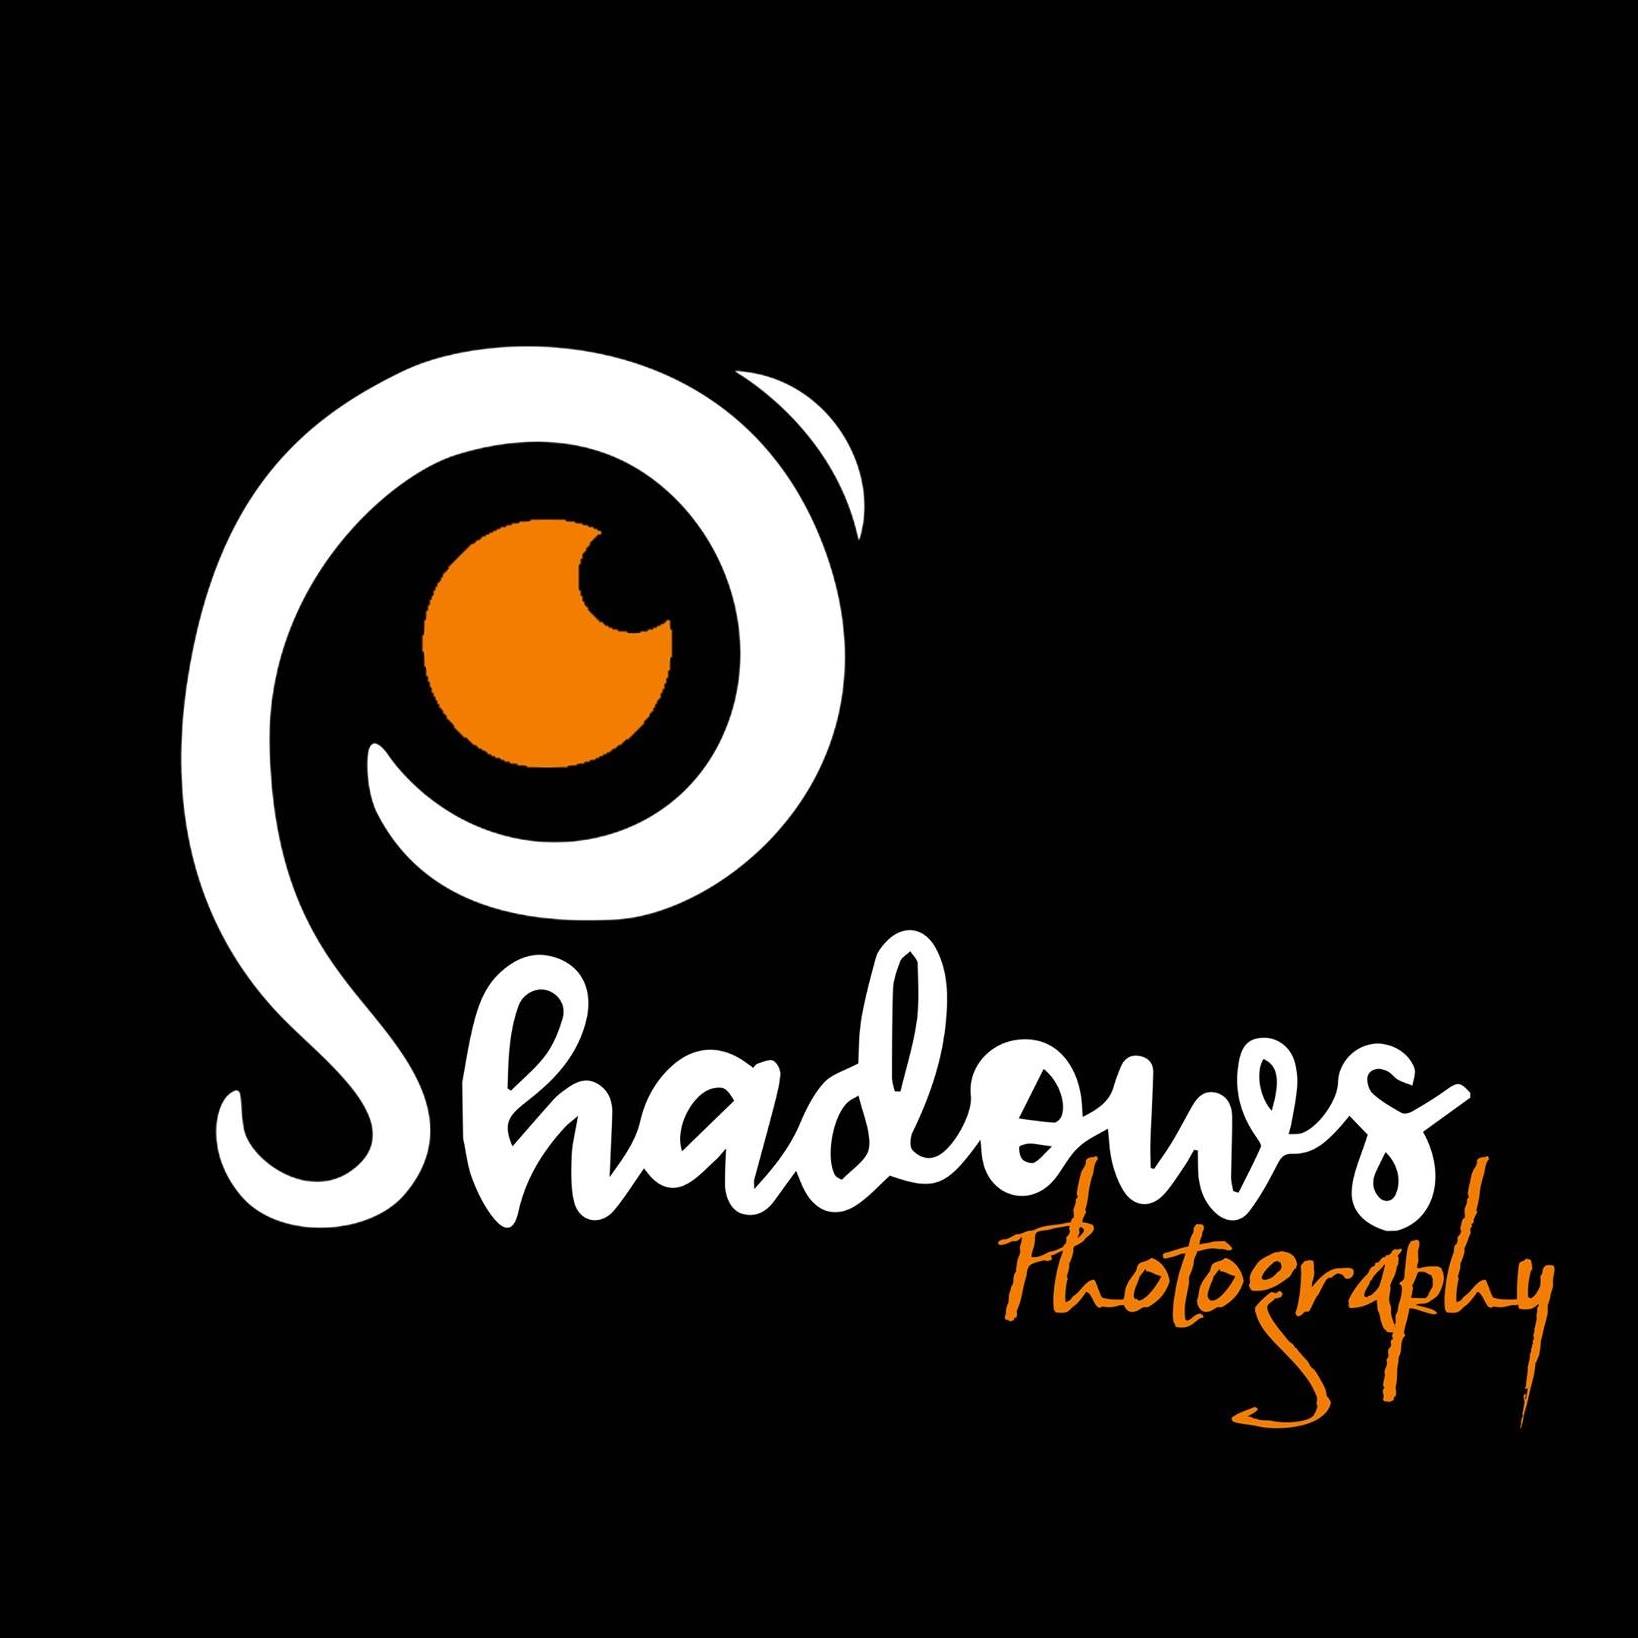 Shadows Photography|Catering Services|Event Services